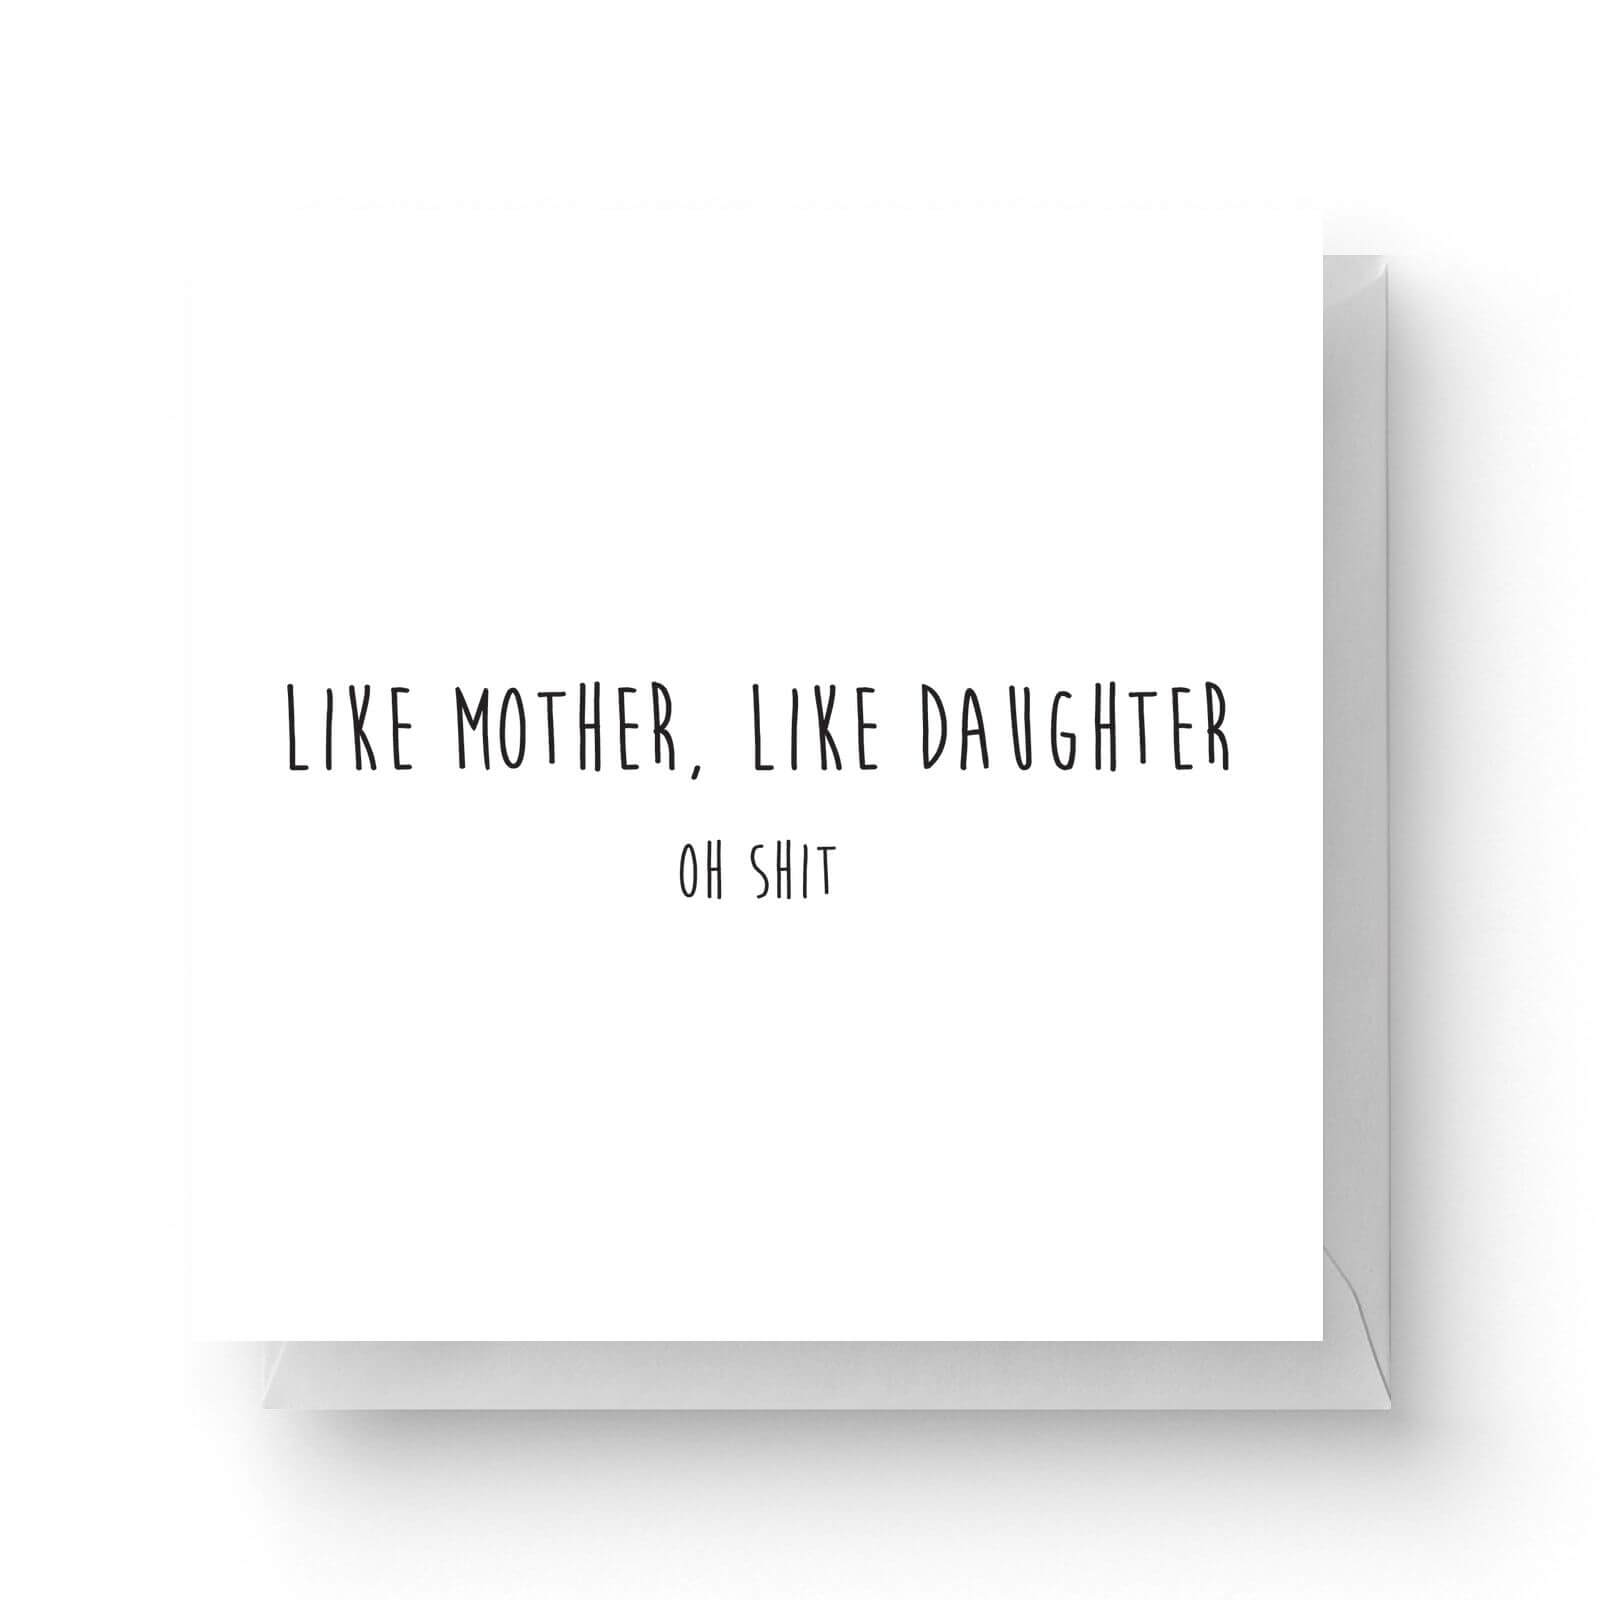 Image of Like Mother, Like Daughter Square Greetings Card (14.8cm x 14.8cm)